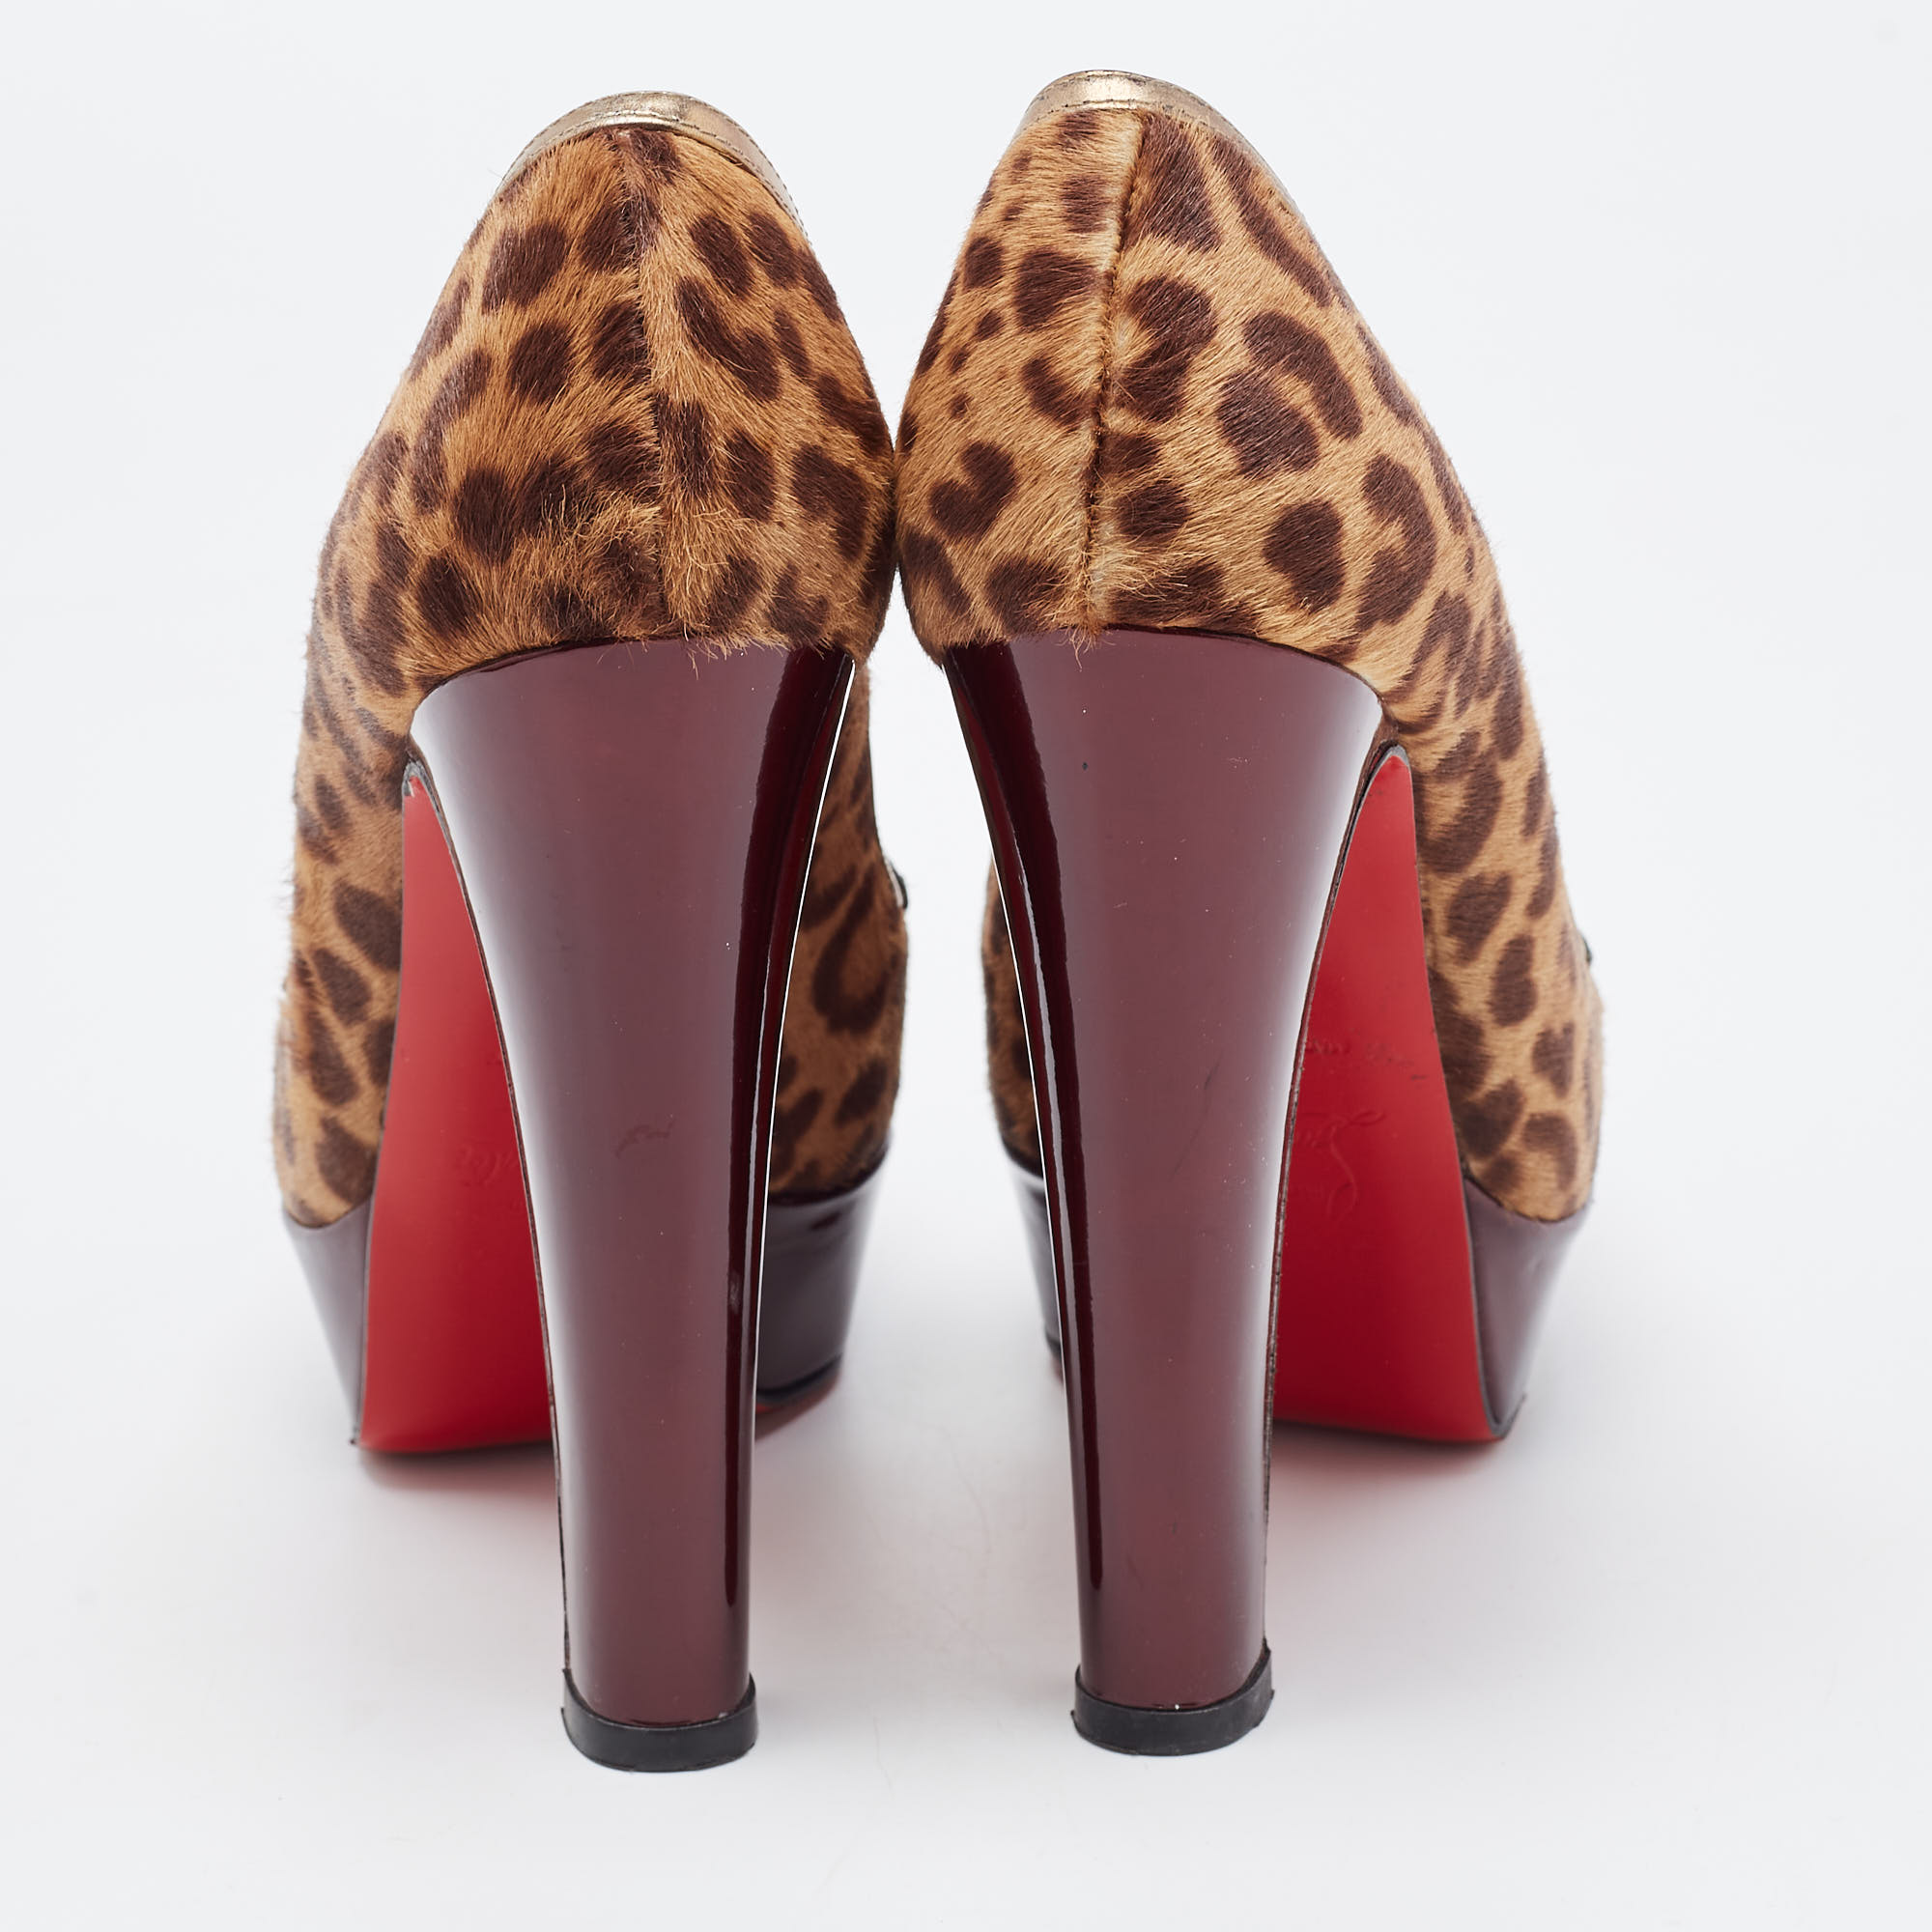 Christian Louboutin Tricolor Animal Print Calf Hair And Suede Platform Loafer Pumps Size 36